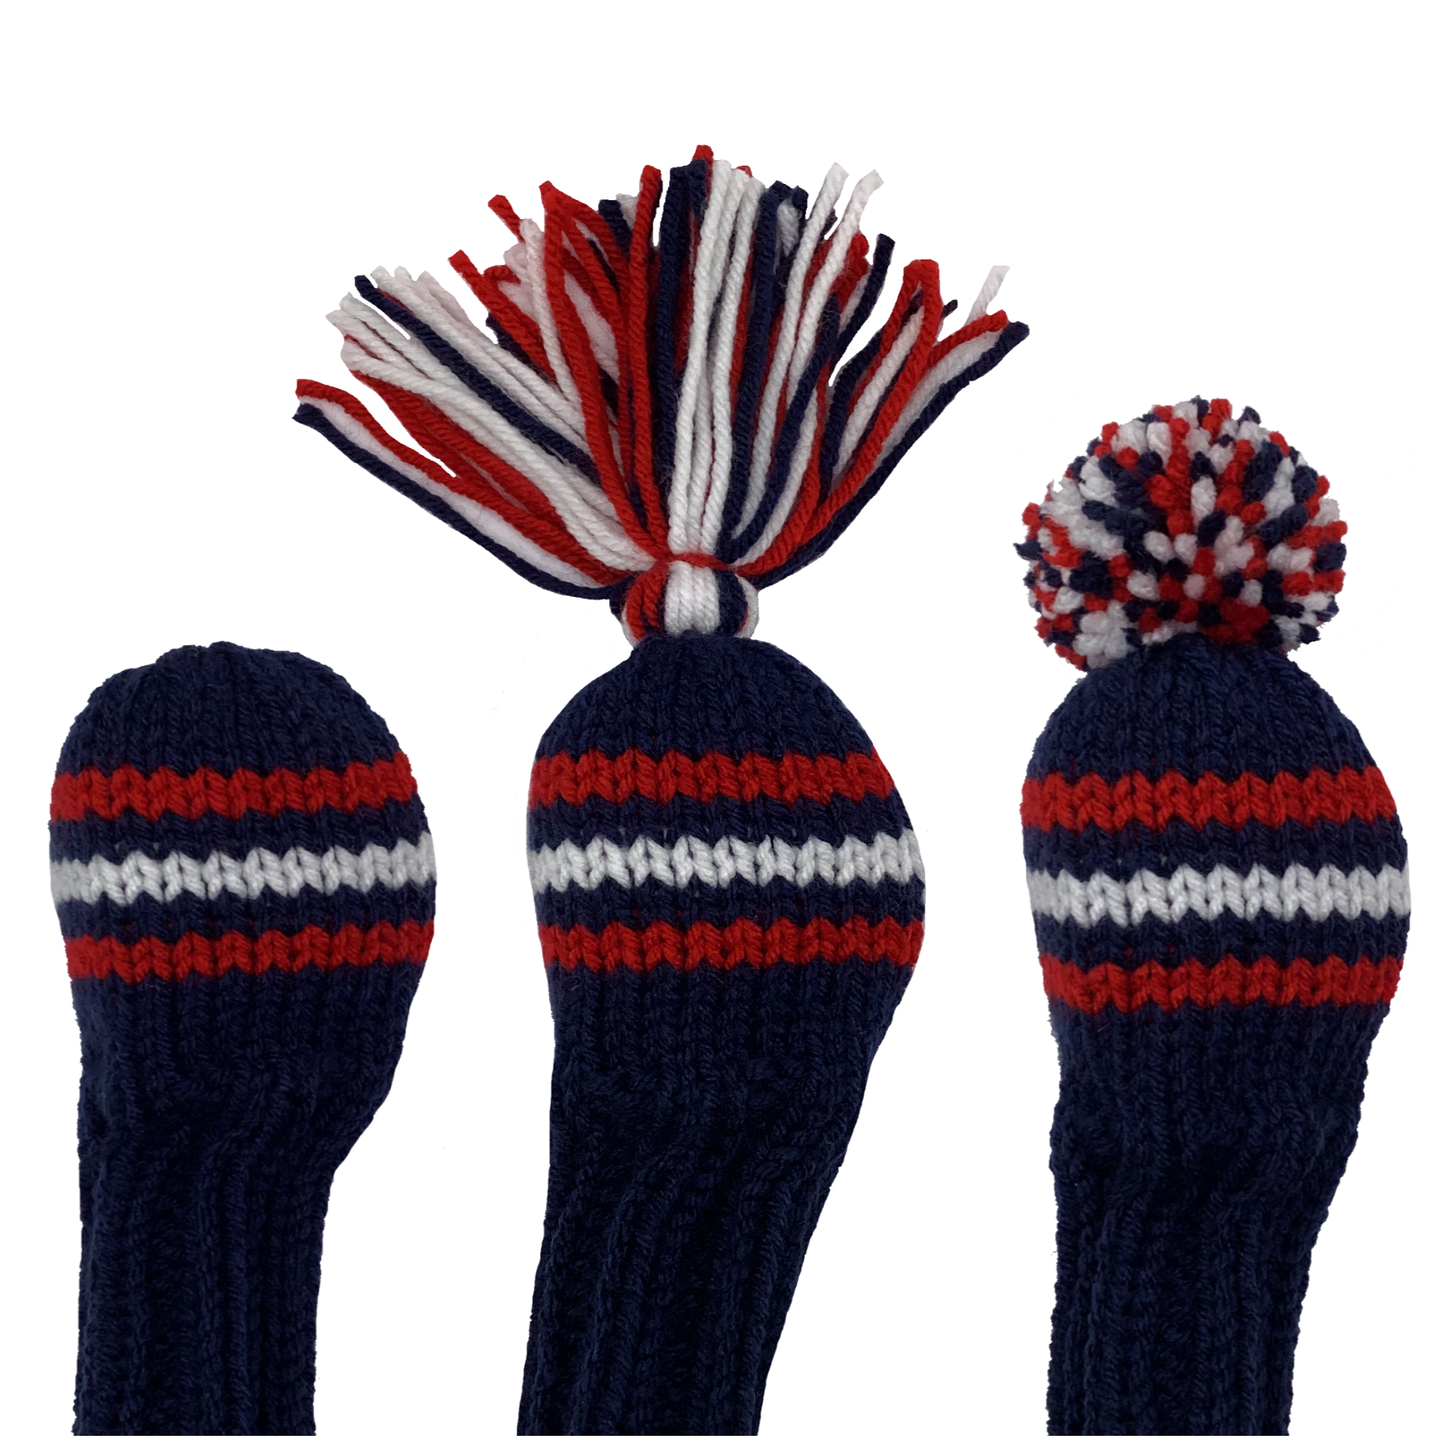 3 hybrid golf club knit headcover in navy blue with three stripes in alternating red and white and the option of adding a red, navy and white tassel or pom-pom.